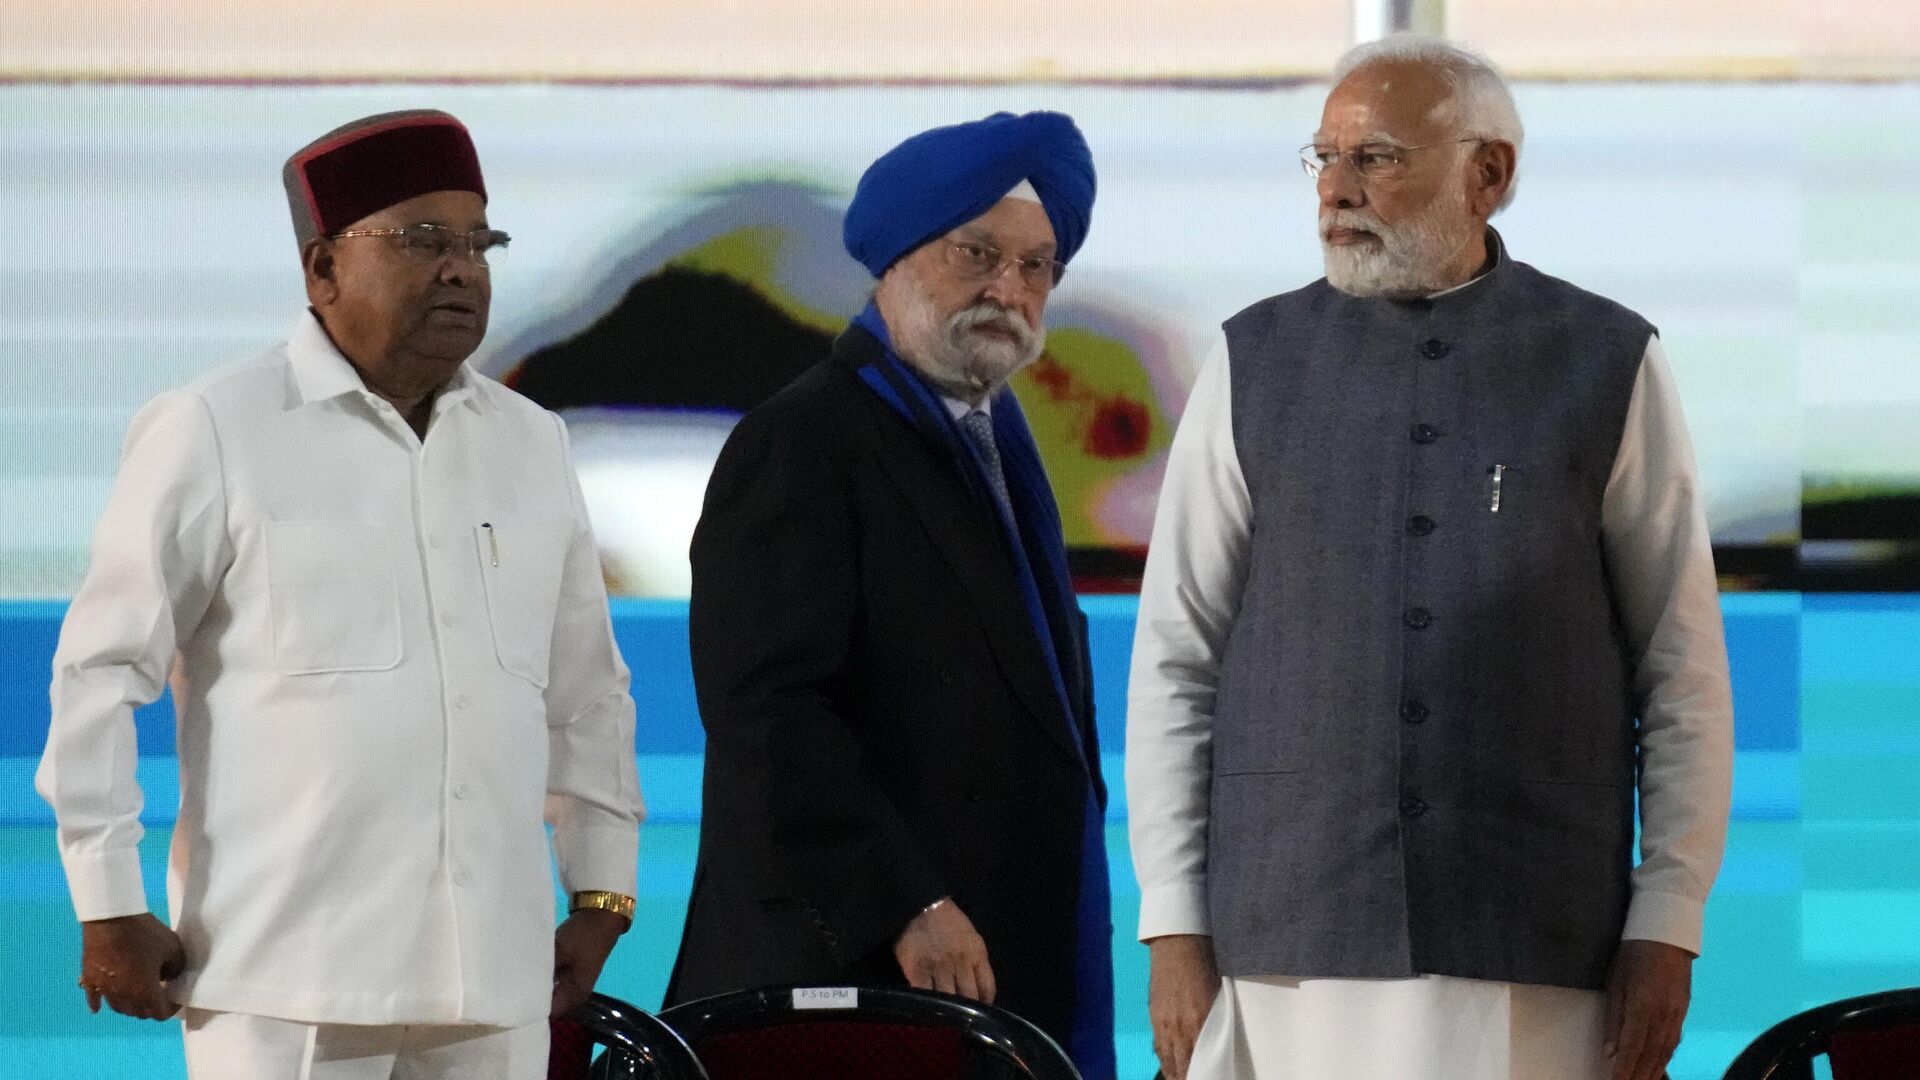 Indian Prime Minister Narendra Modi, right, watches as his colleague and minister for petroleum and natural gas Hardeep Singh Puri, center, walks to address a gathering at the 'India Energy Week 2023' in Bengaluru, India, Monday, Feb. 6, 2023. - Sputnik India, 1920, 15.03.2023